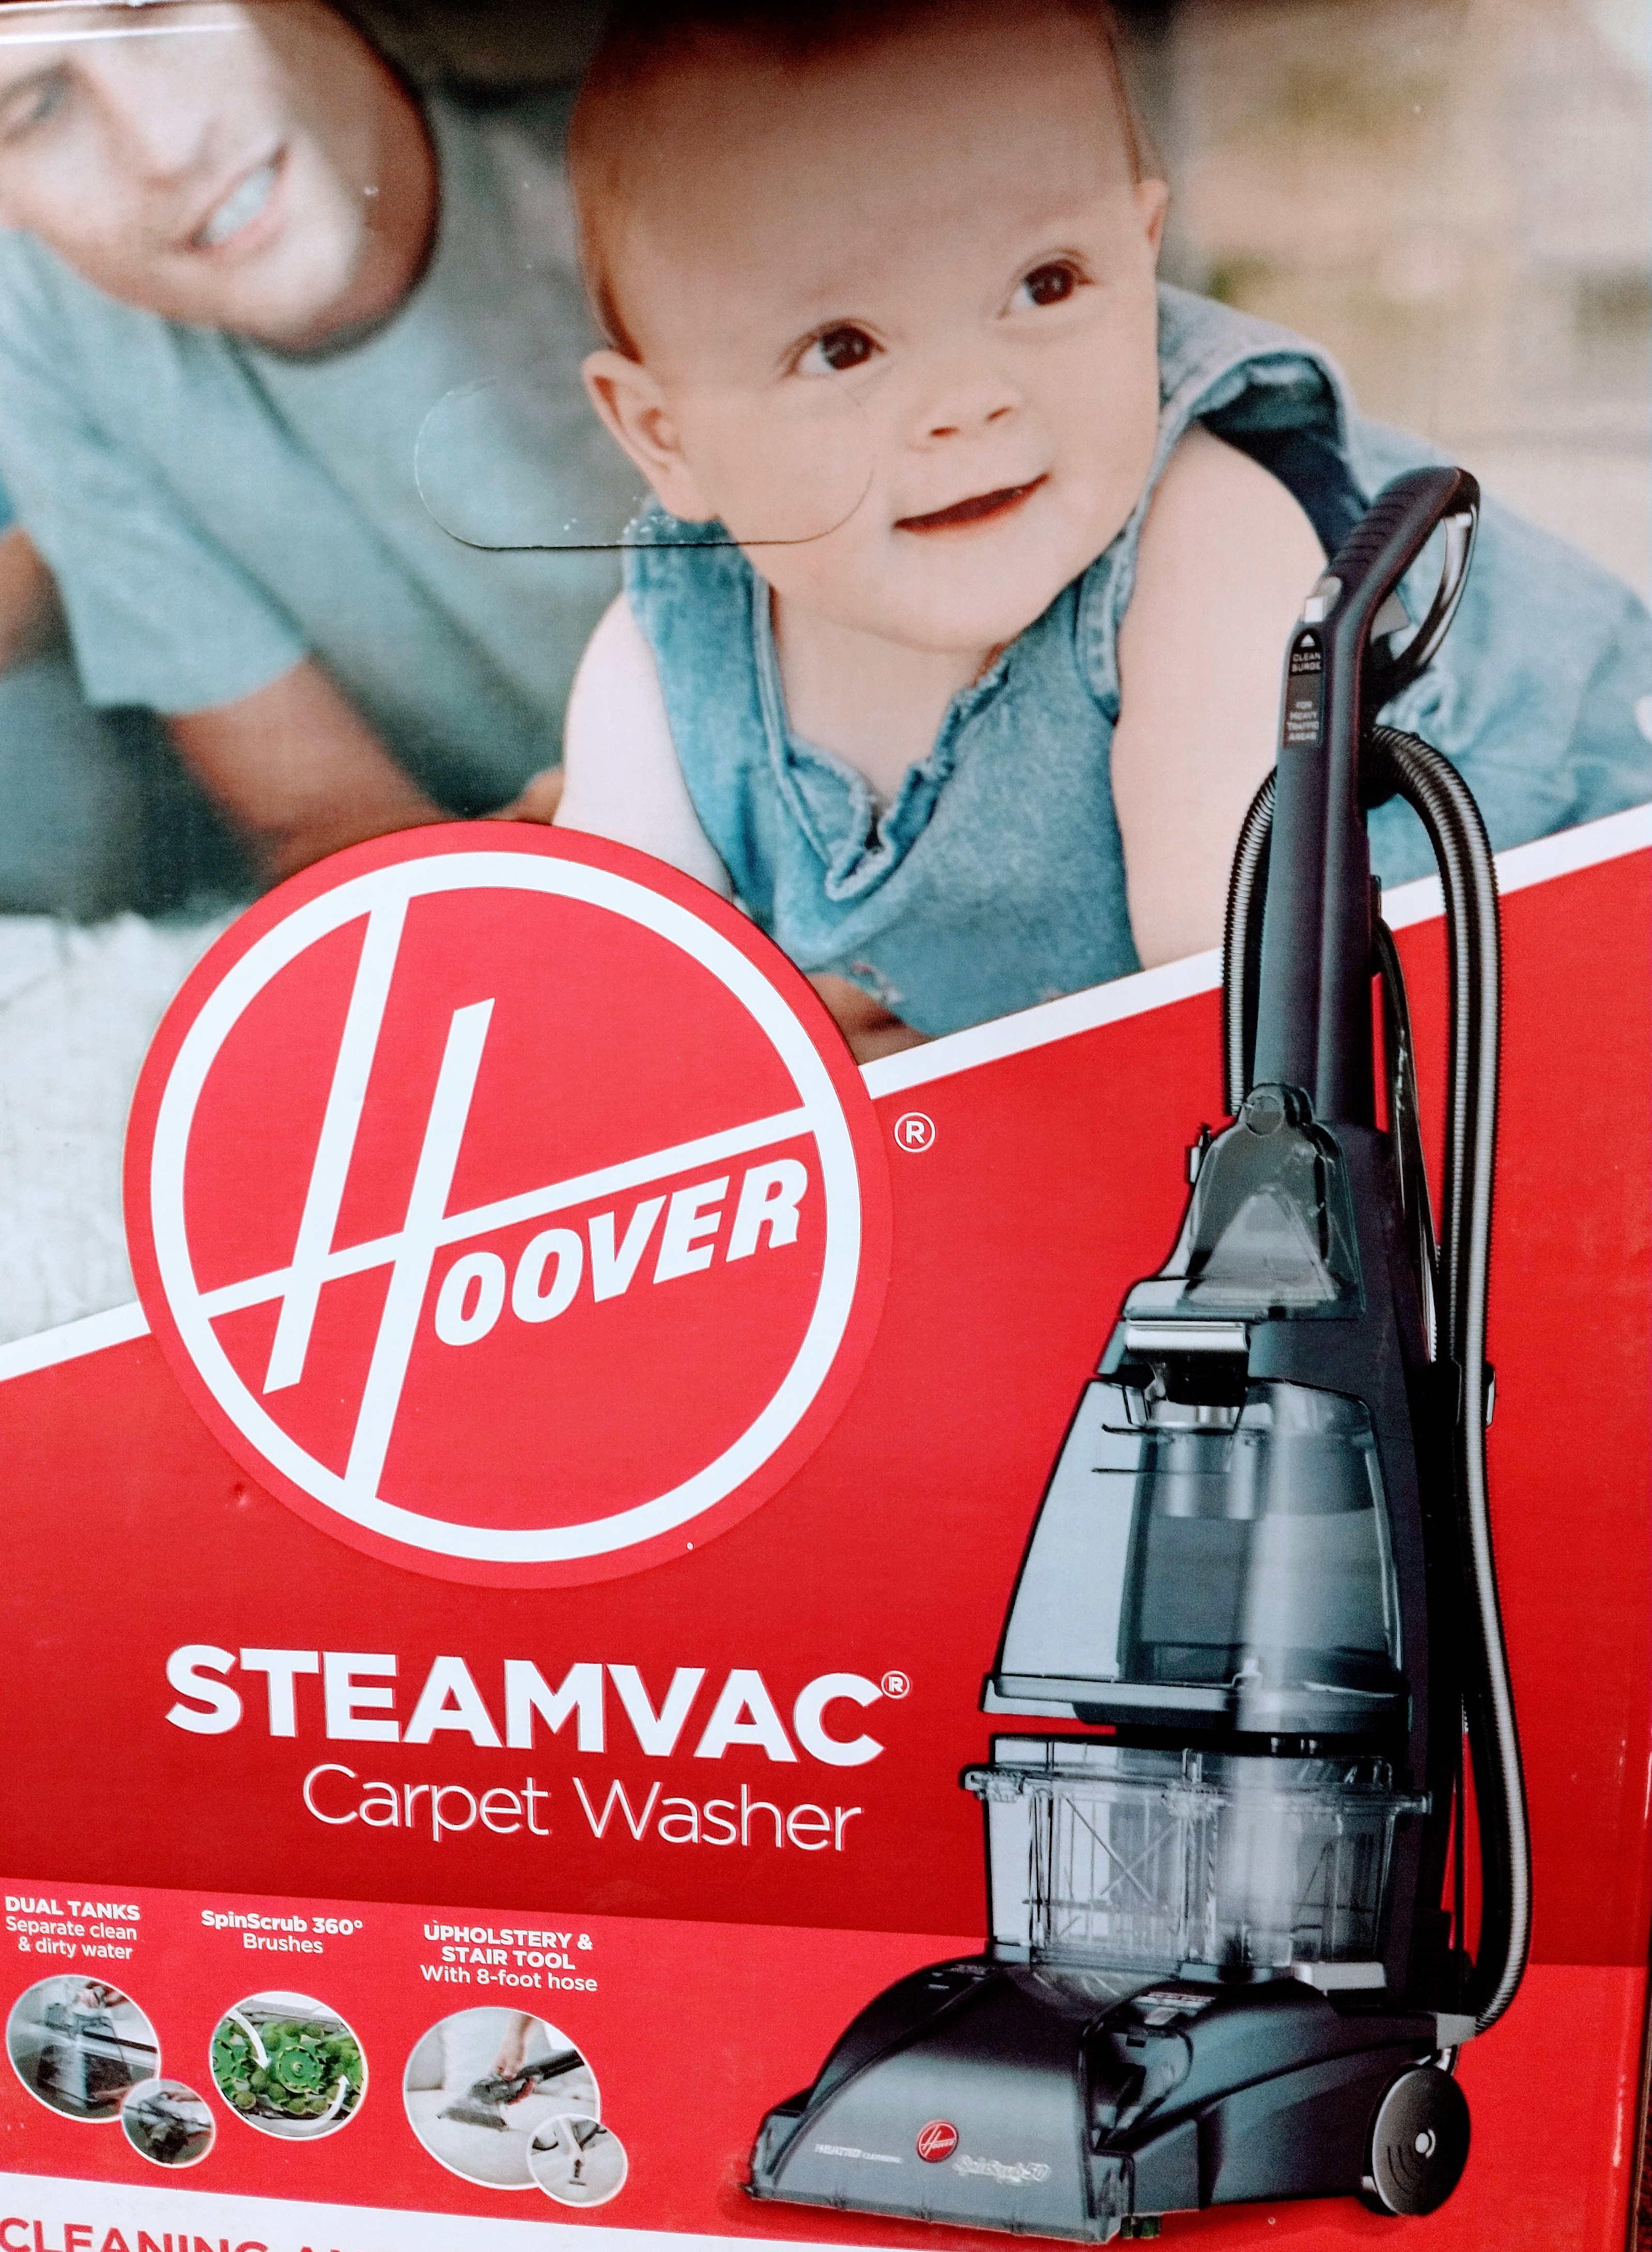 Hoover Steam Vac Carpet Washer F5915 905nc With C